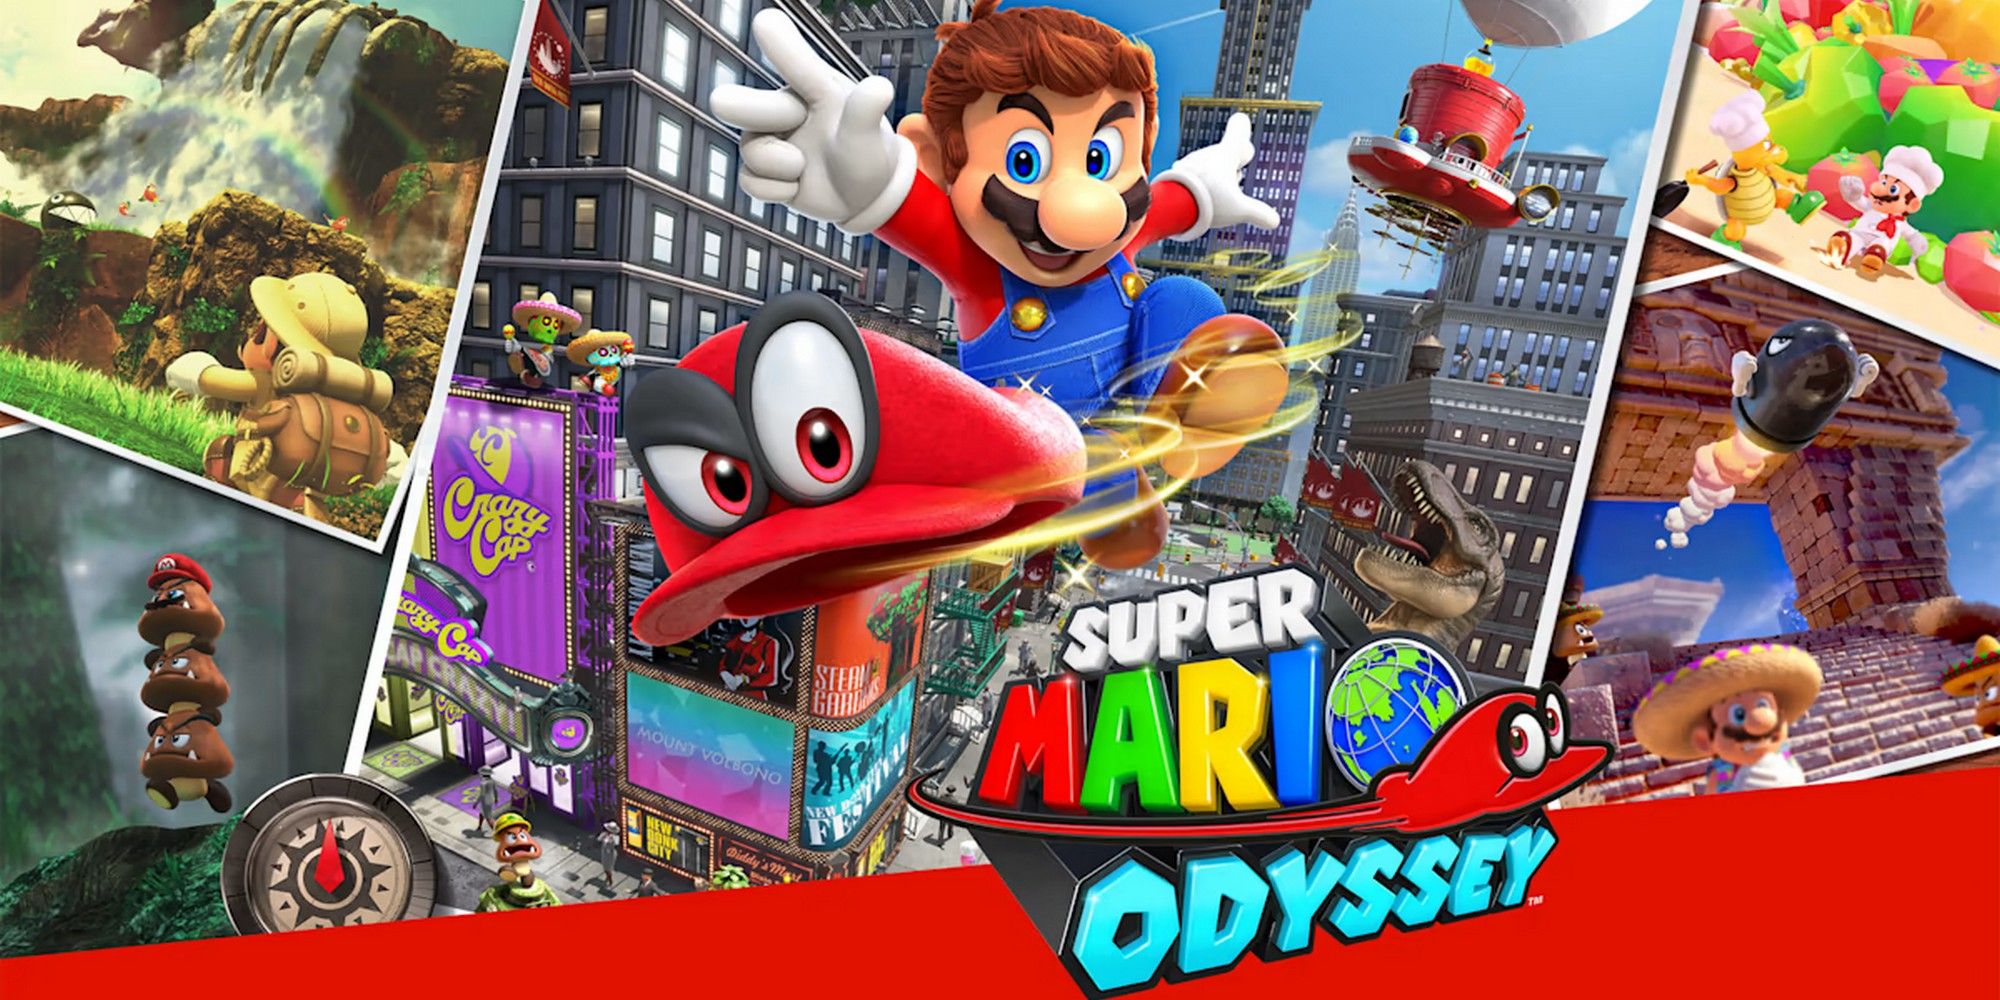 Best Motion Games Switch - Super Mario Odyssey - Mario Throwing Cappy While Surrounded By Images Of Locations From The Game